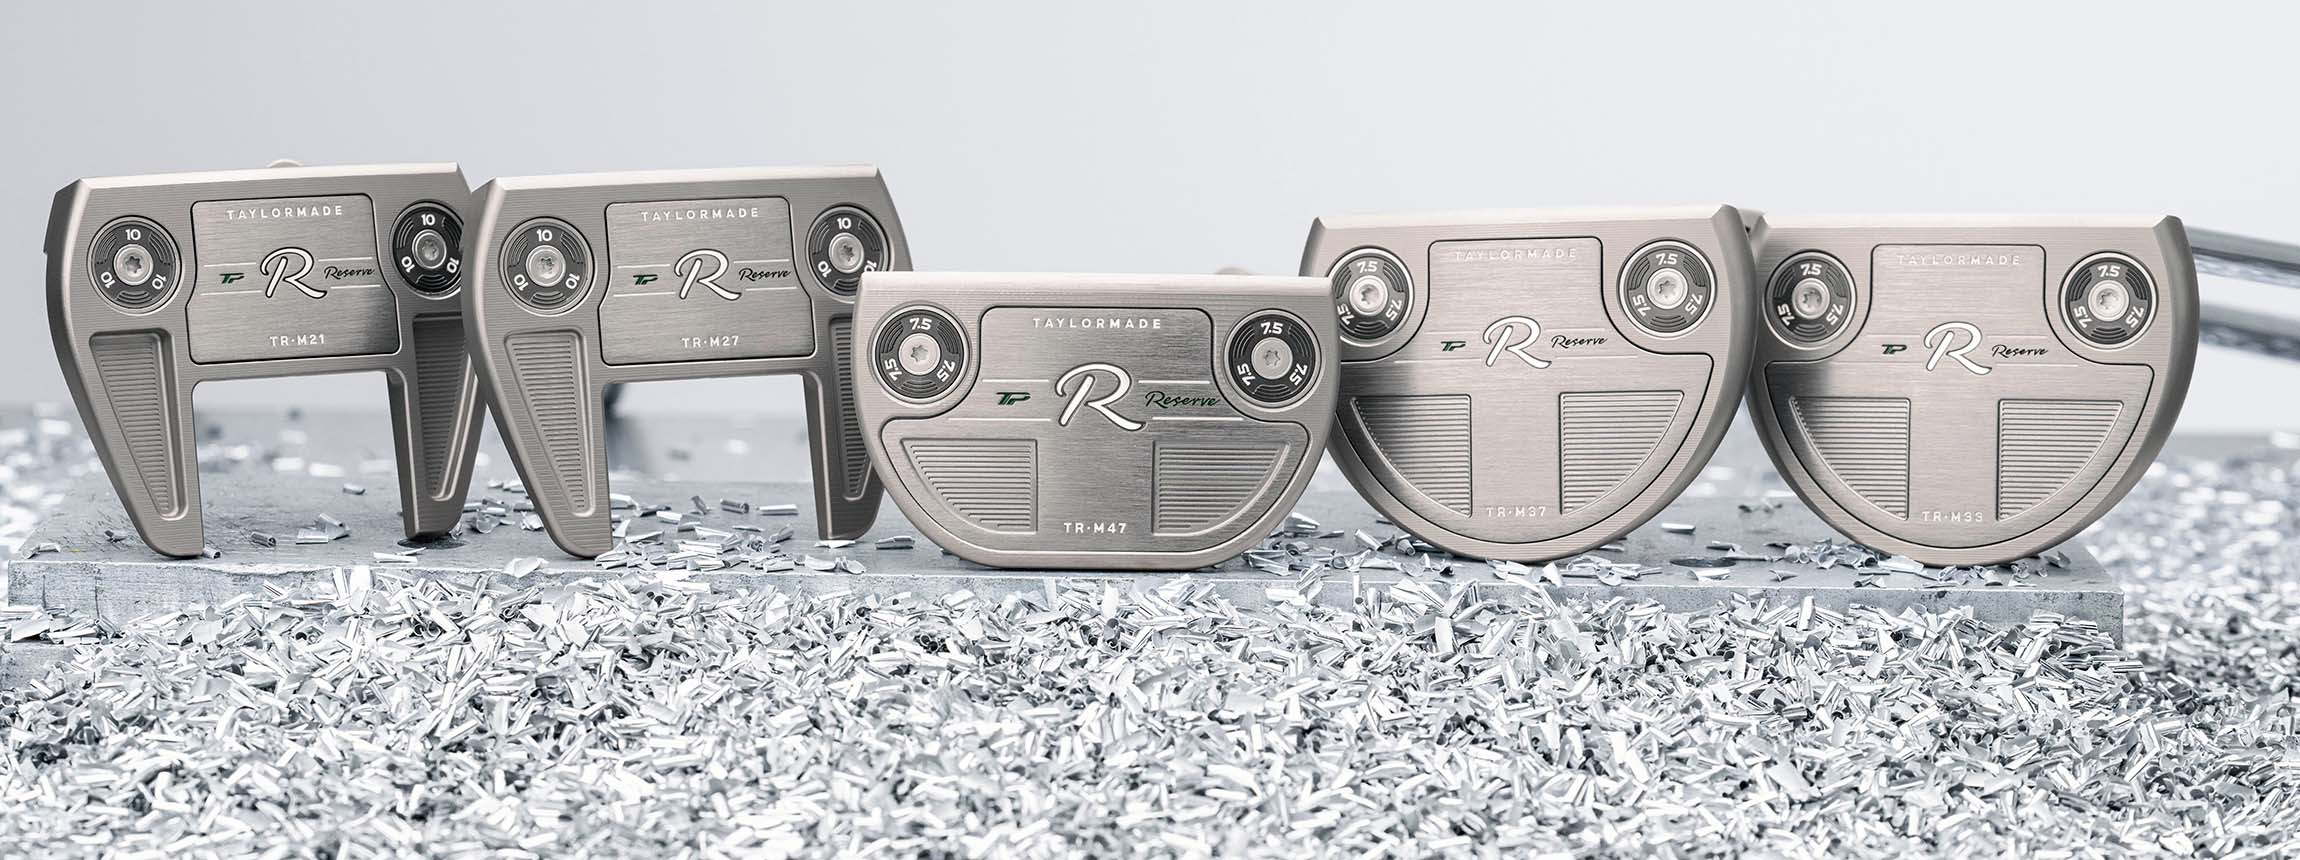 Taylormade-golf-tp-reserve-milled-putters